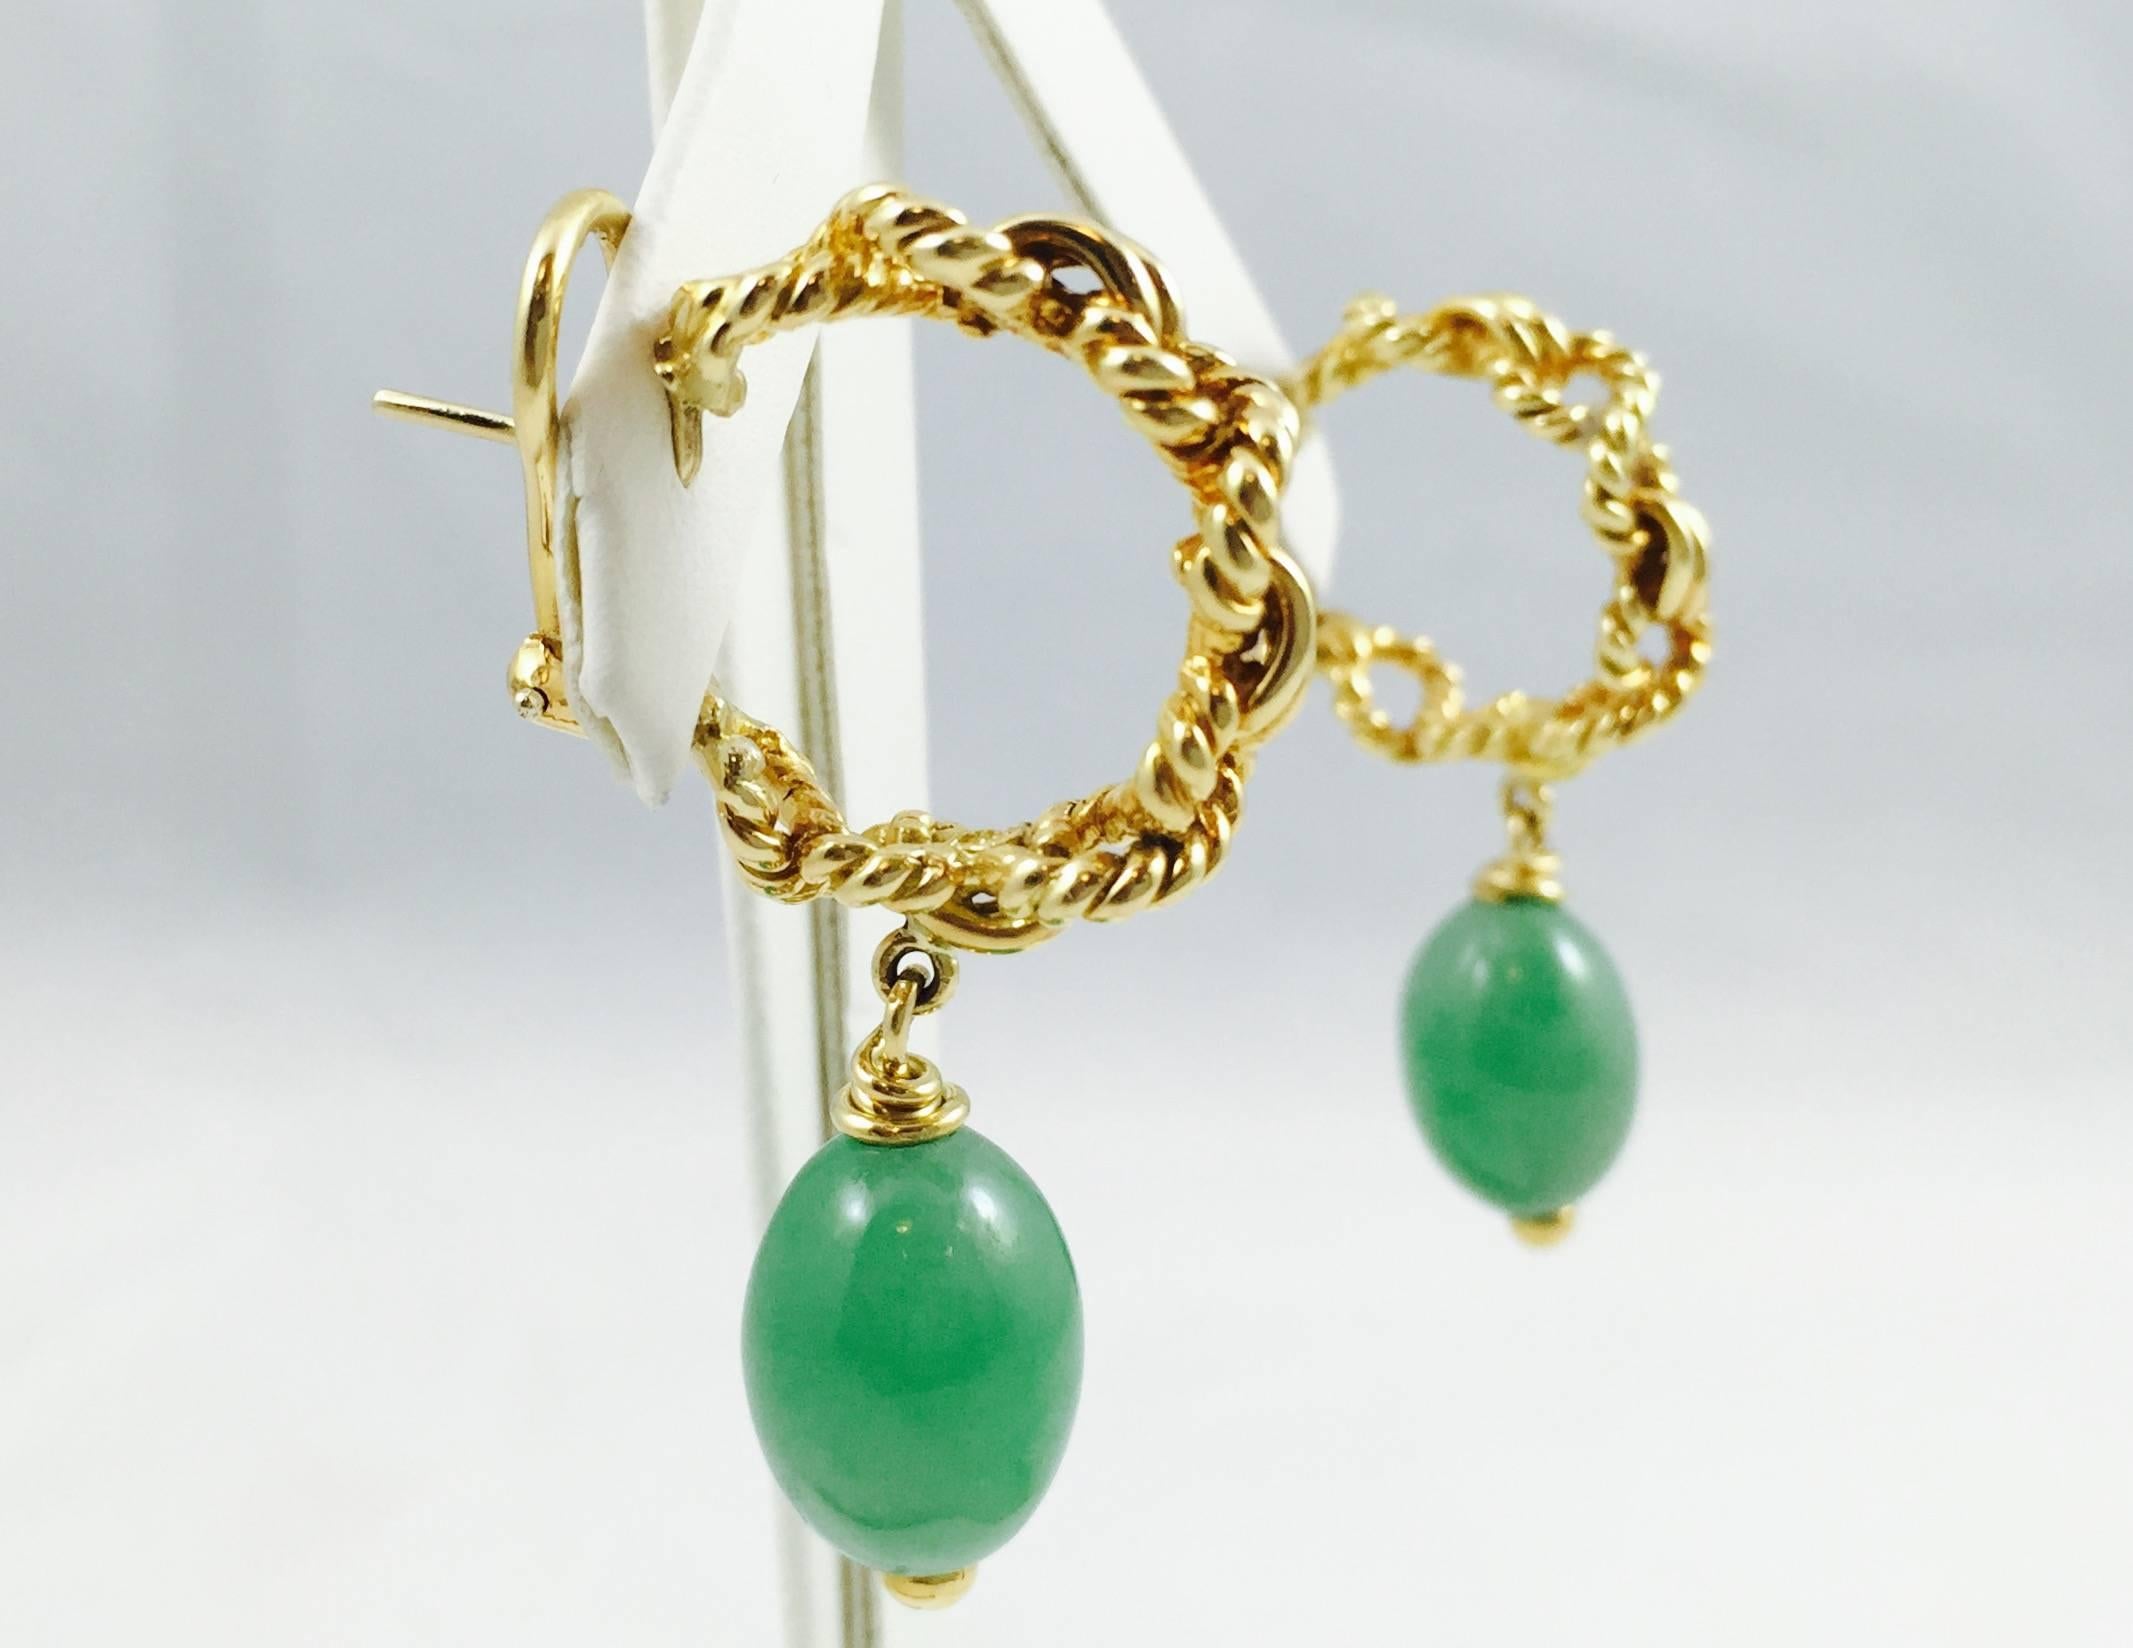 Tiffany & Co is perhaps the best known name in the jewelry industry.  These classic earrings are beautifully crafted in 18 karat yellow gold. Pierced Omega backs are easily converted to clip on style.  An open rope hoop boasts a serene green Jade